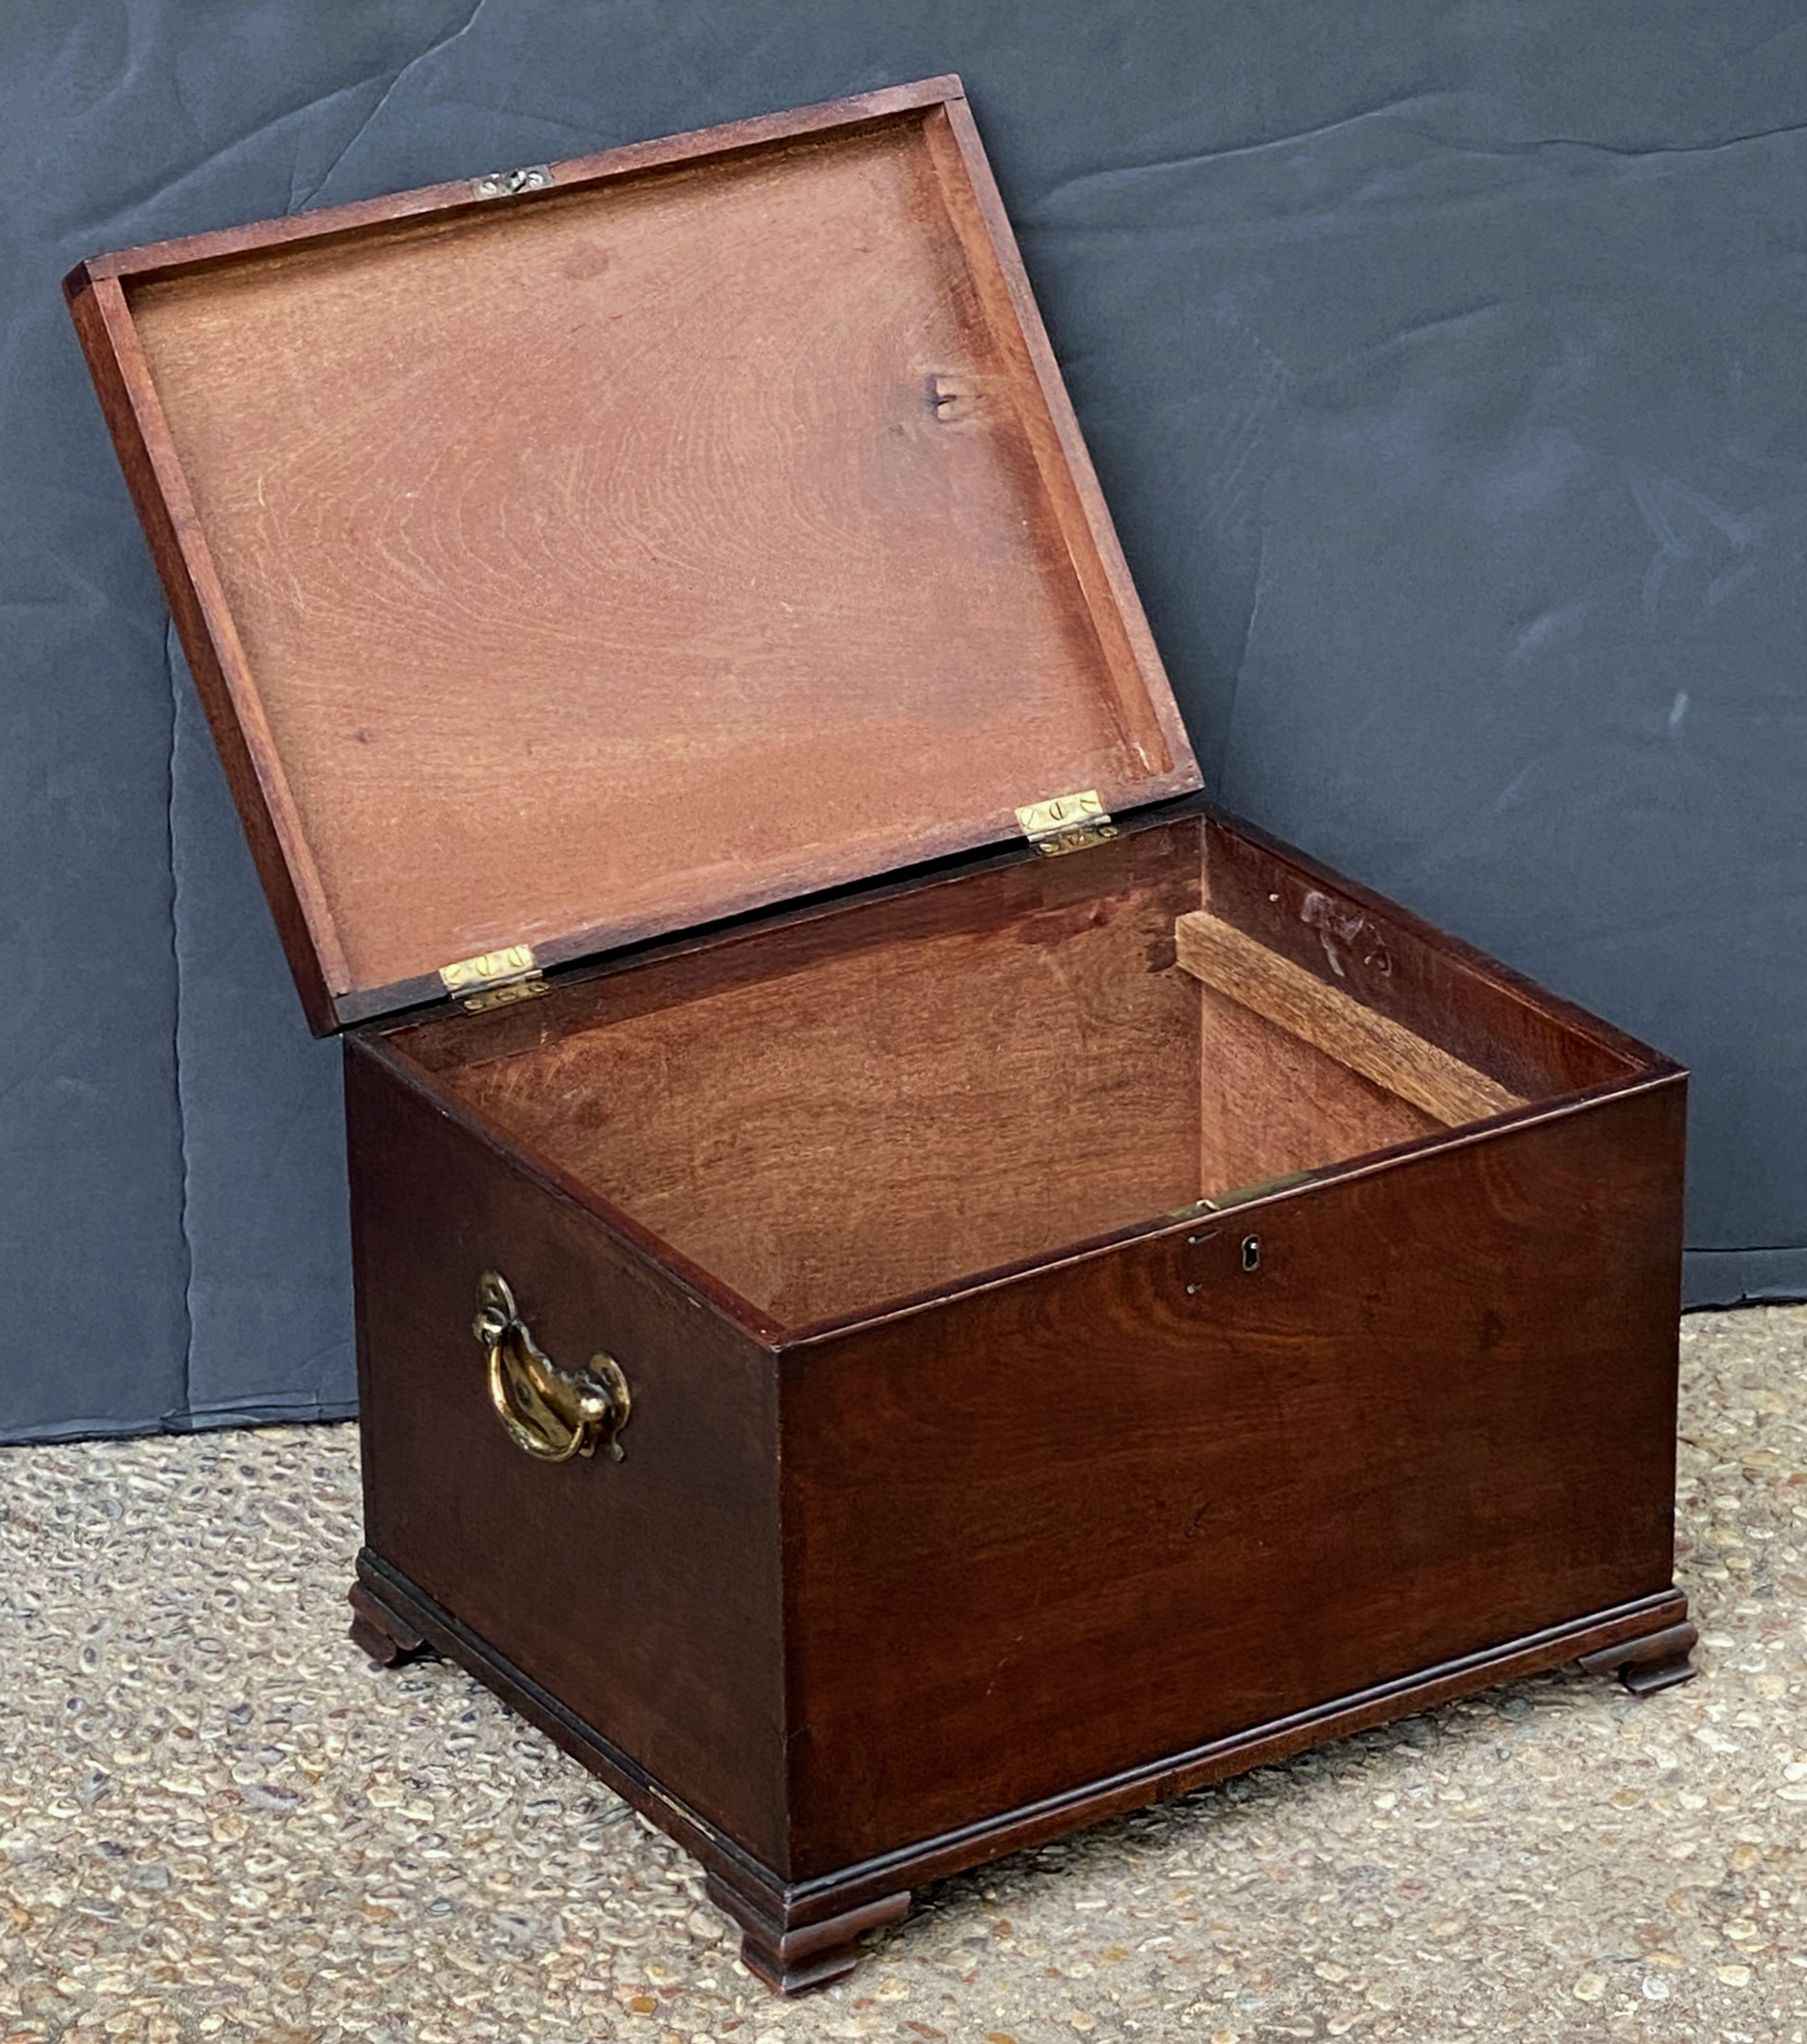 19th Century English Small Chest or Box of Mahogany from the George III Era